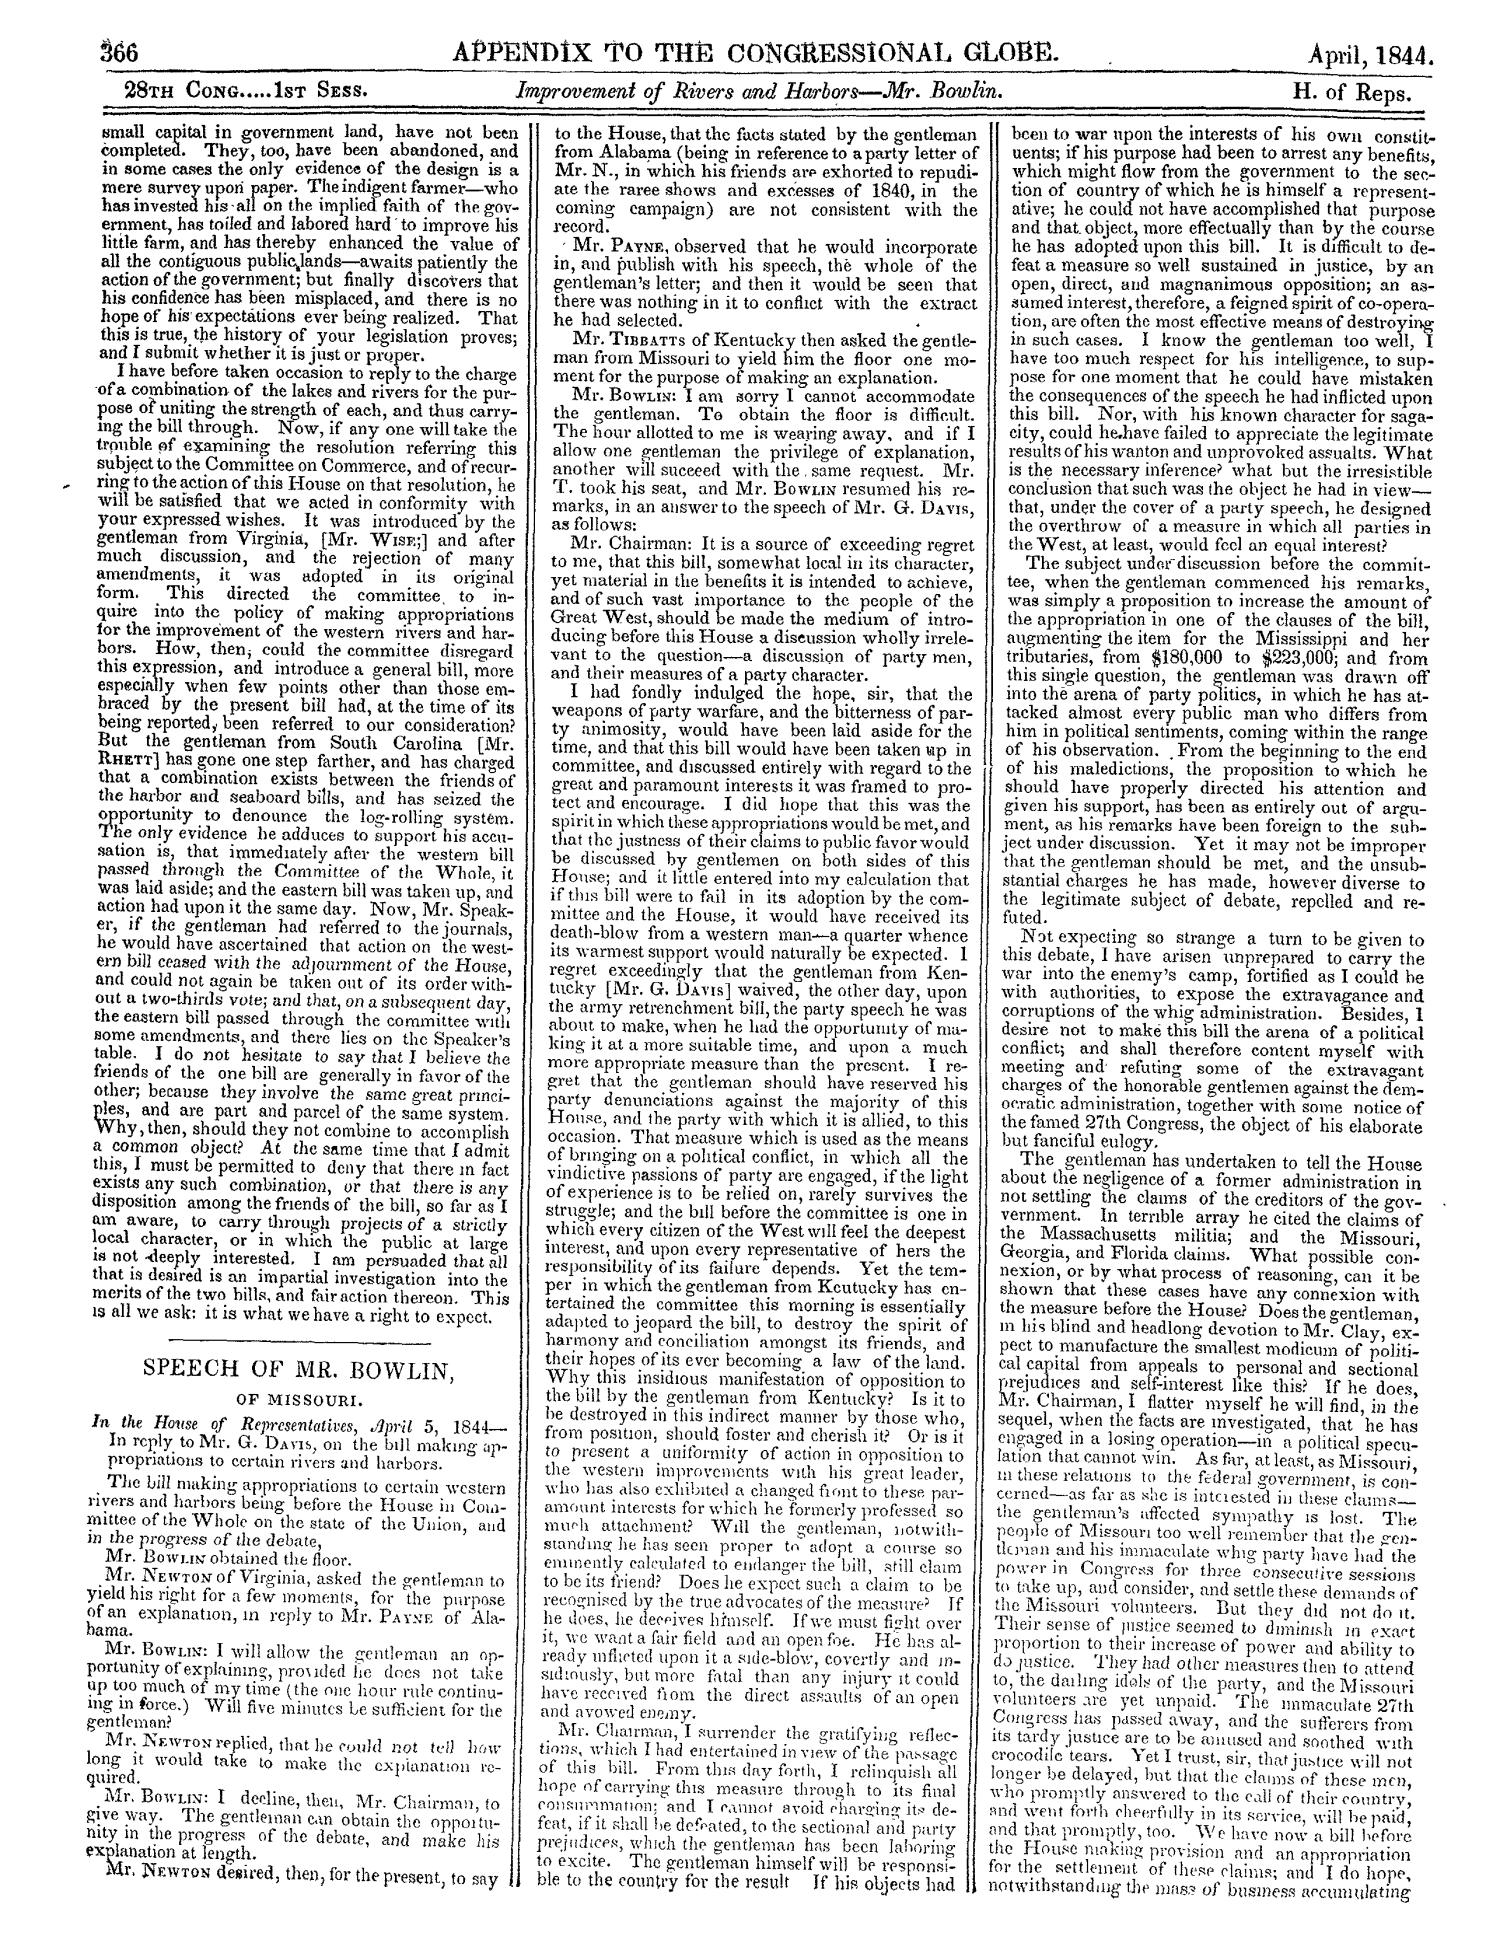 The Congressional Globe, Volume 13, Part 2: Twenty-Eighth Congress, First Session
                                                
                                                    366
                                                